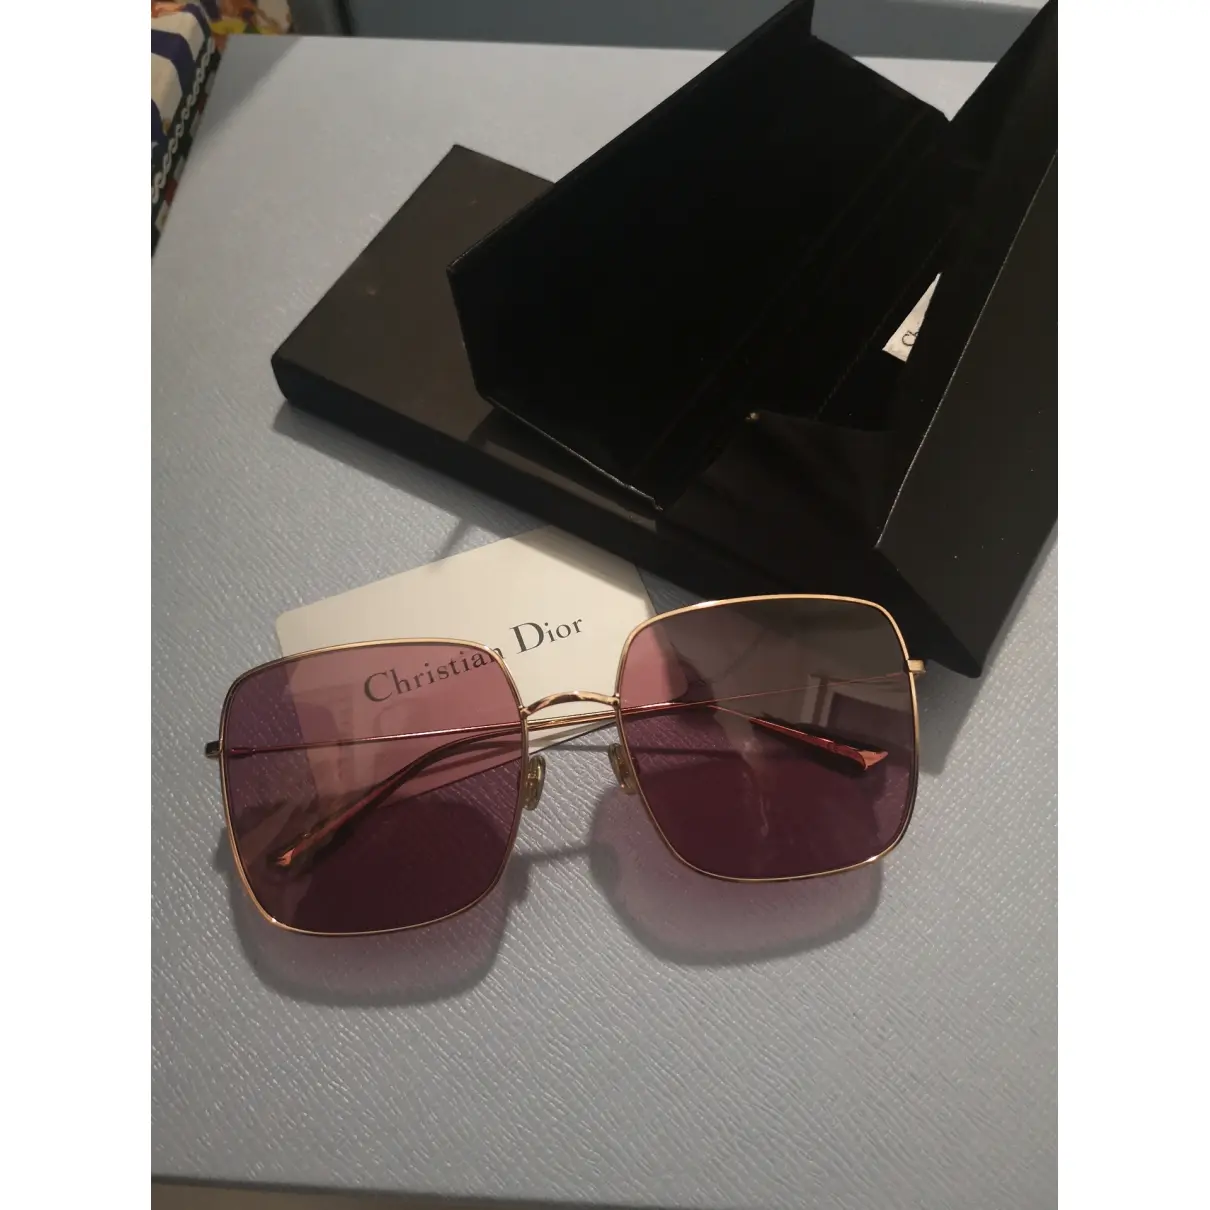 Buy Dior Stellaire 1 oversized sunglasses online